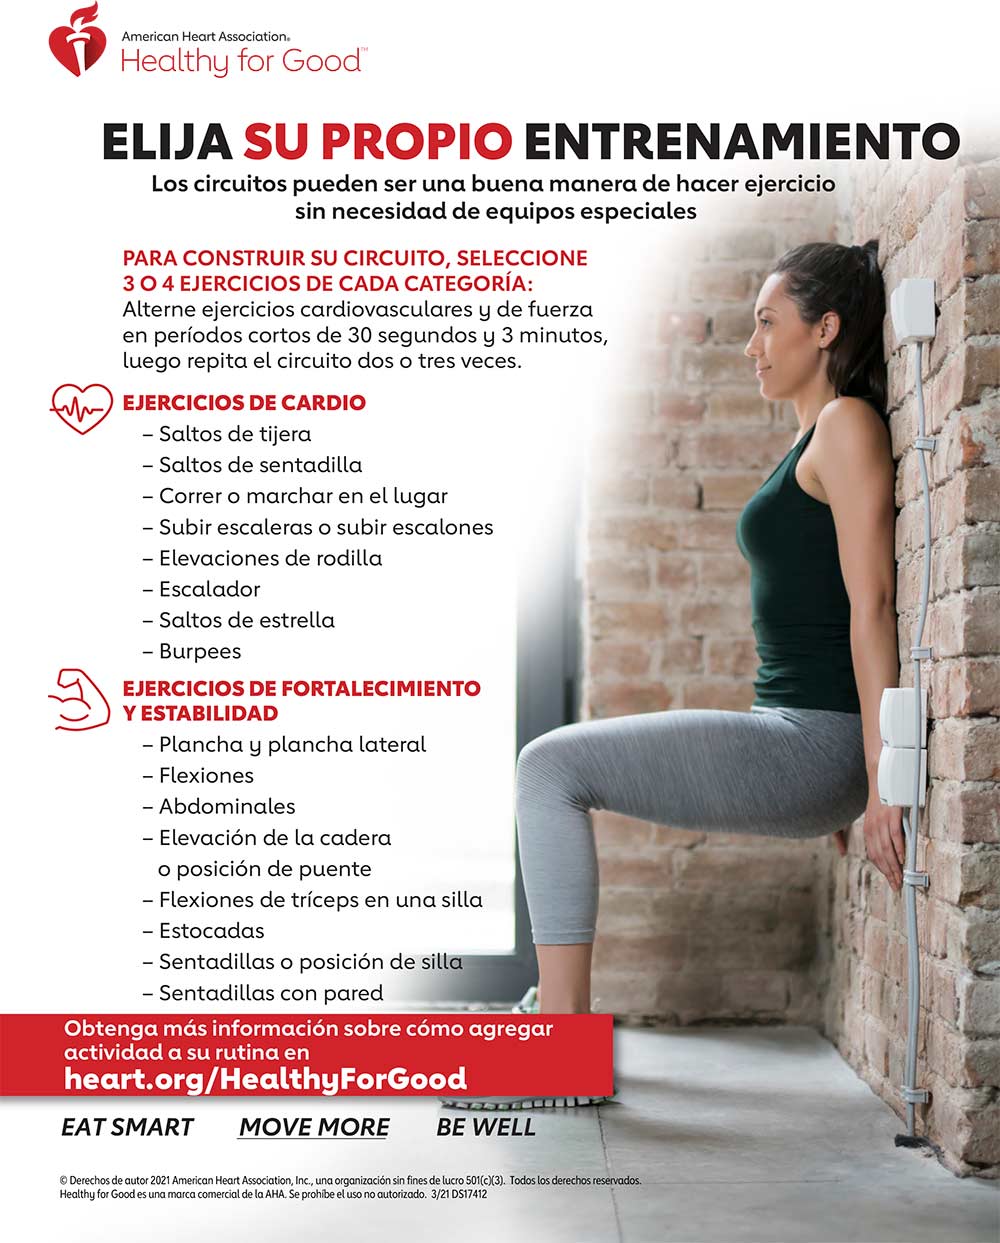 https://www.heart.org/-/media/Healthy-Living-Images/Infographics/Create_Circuit_workout_Infographic_Spanish.jpg